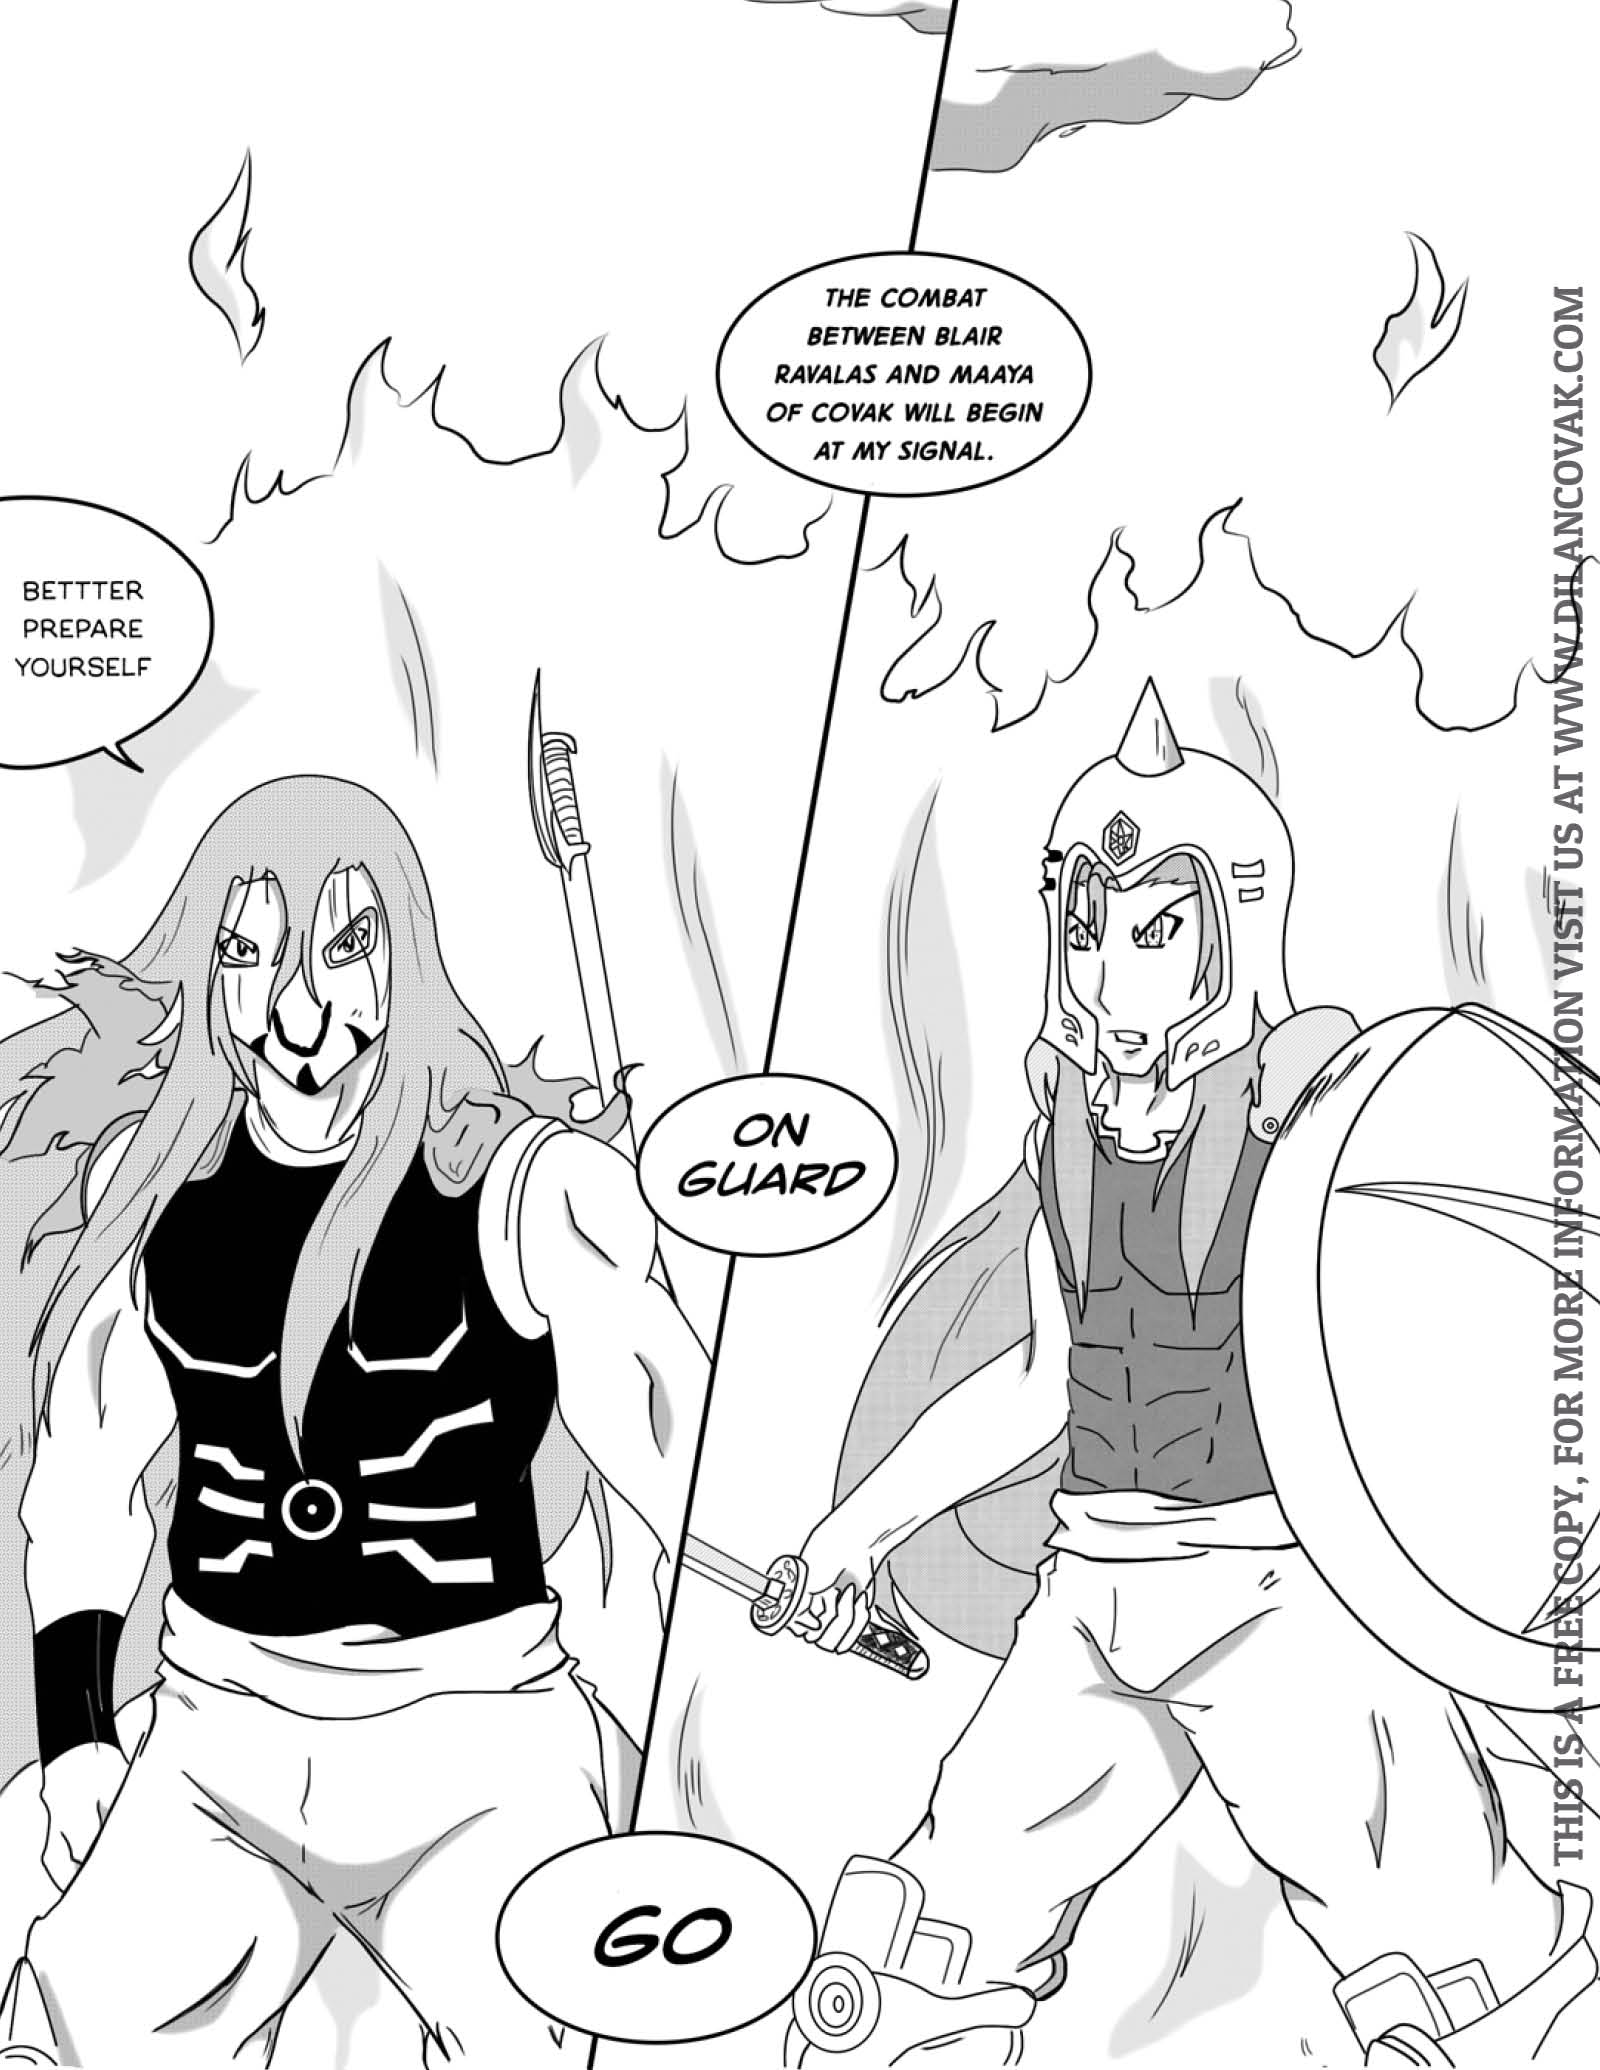 Series Dilan: the Chronicles of Covak - Chapter 2 - Page 12 - Language ENG